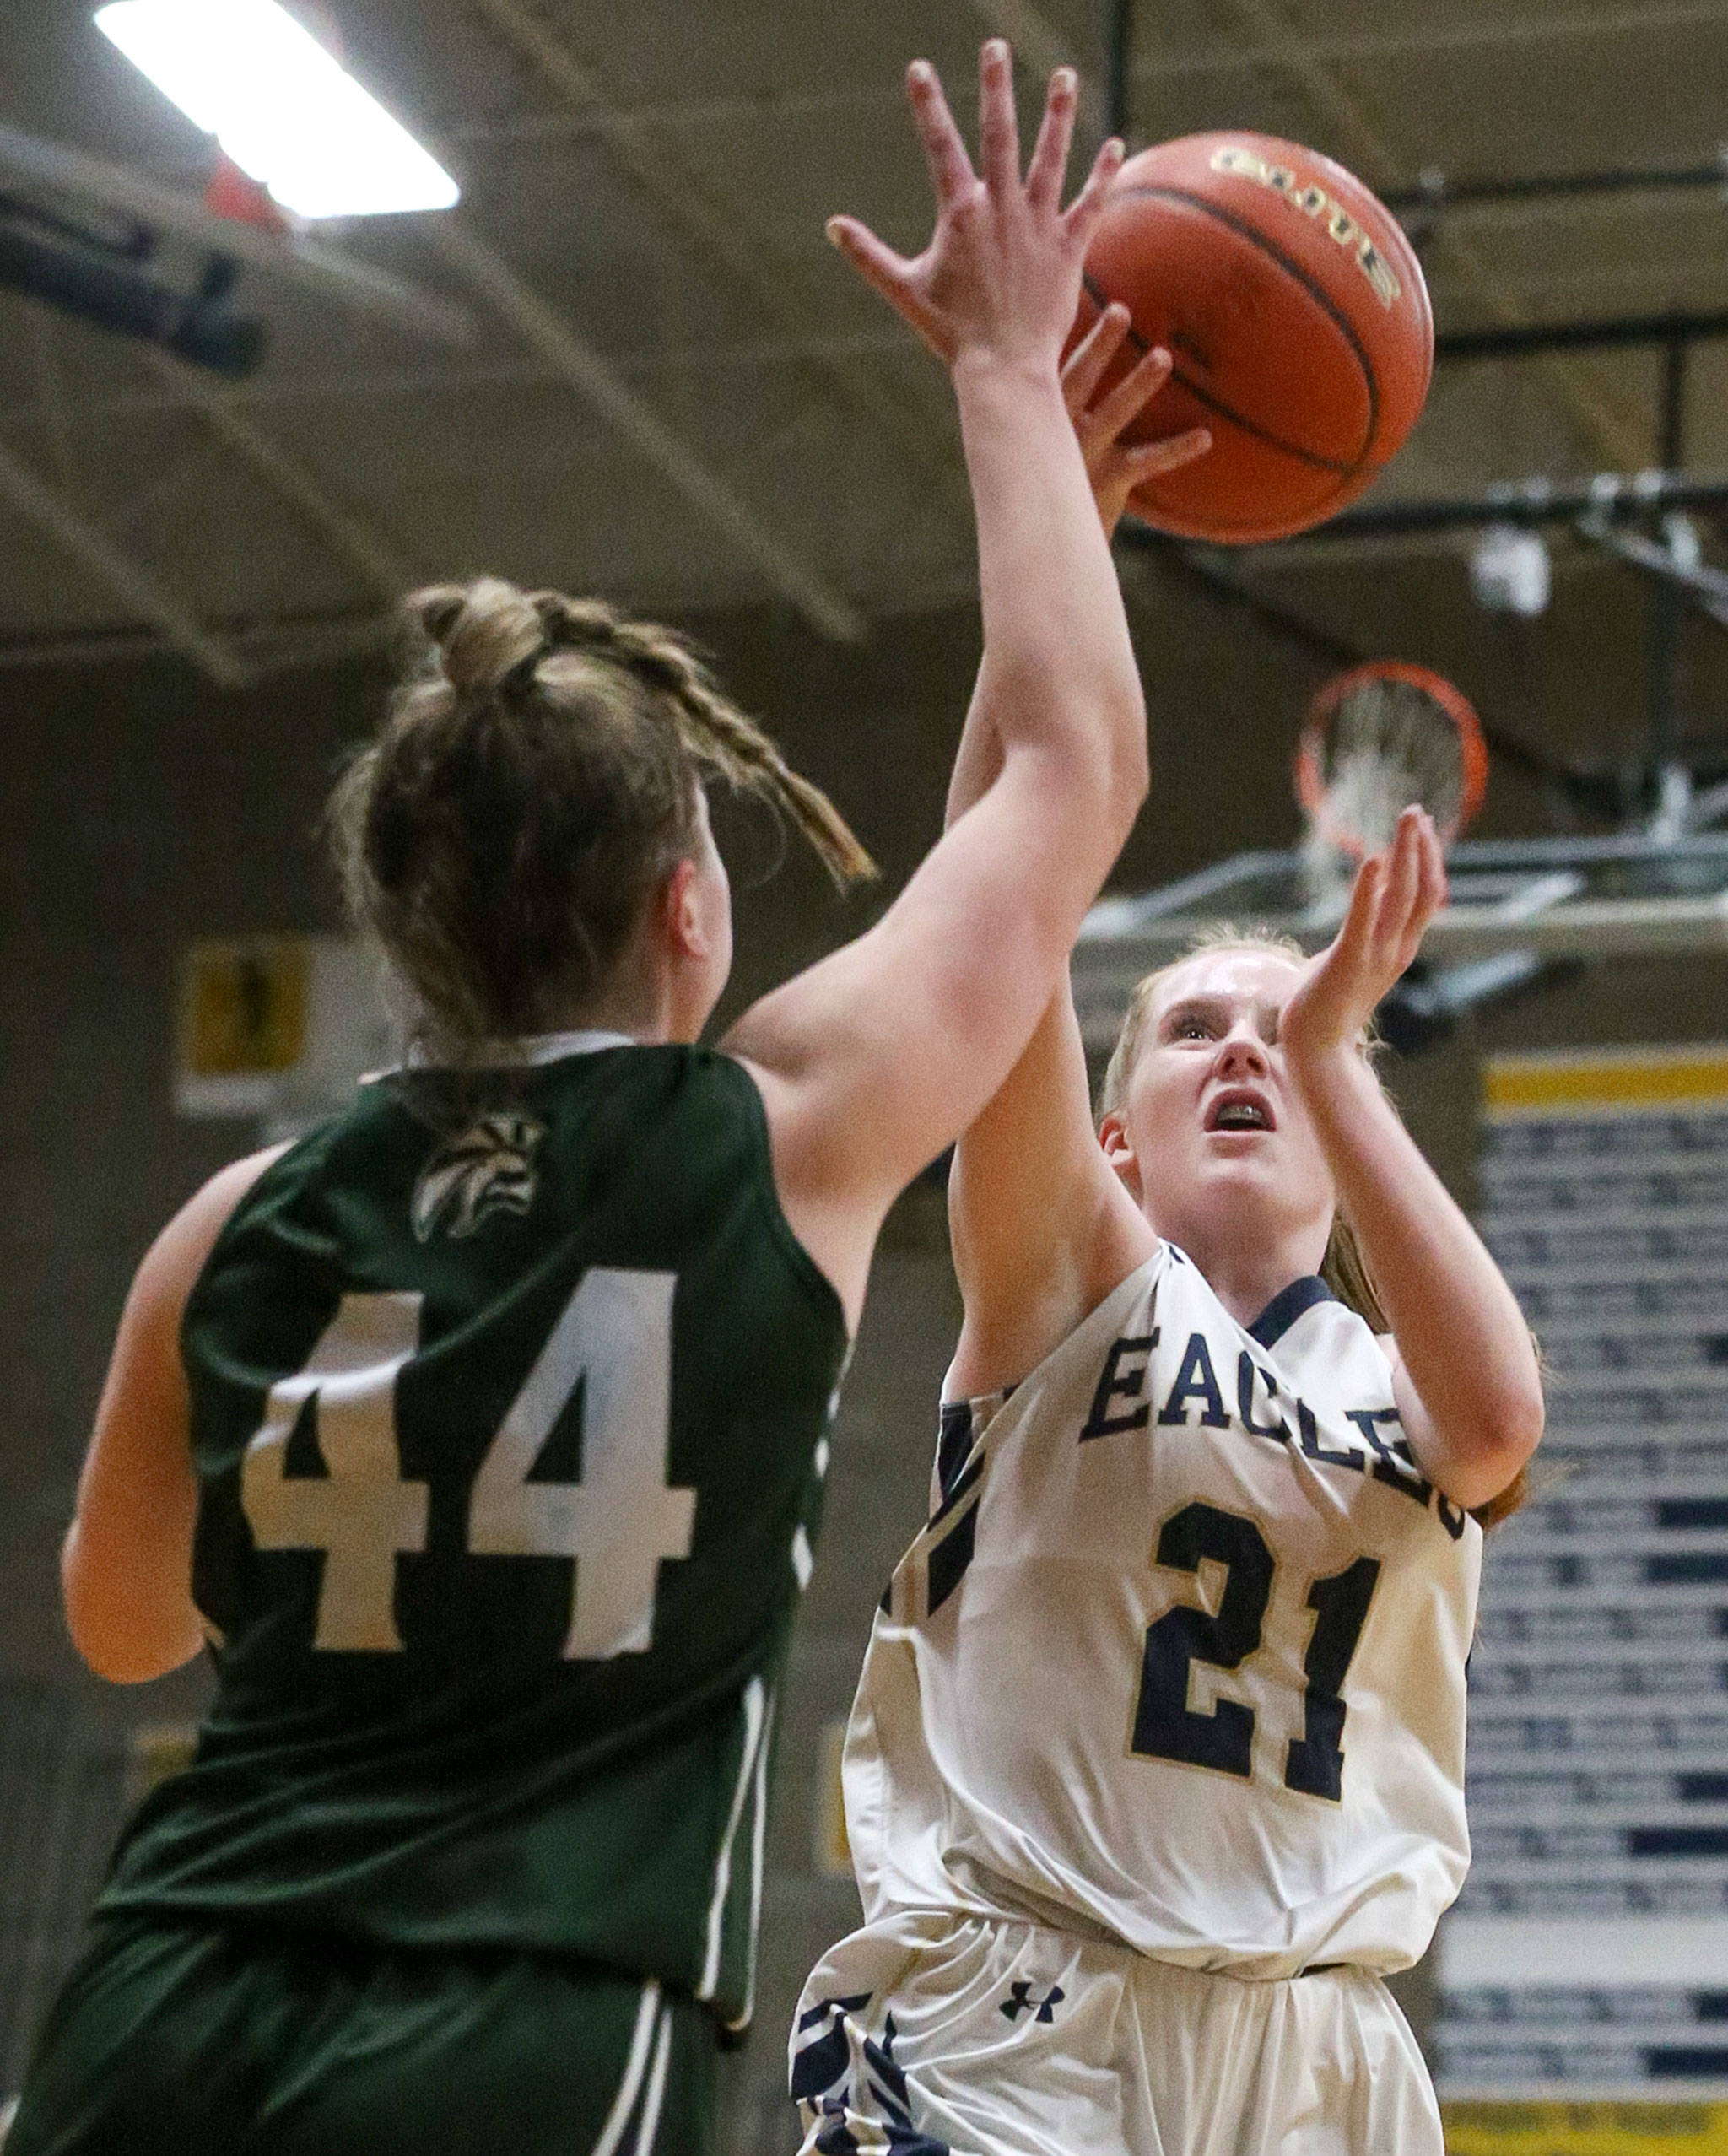 Arlington’s Josie Stupey attempts a shot with Edmonds-Woodway’s Adrienne Poling defending during the 3A district tournament Friday night at Arlington High on February 15, 2019 in Arlington. The Eagles won 55-38. (Kevin Clark / The Herald)